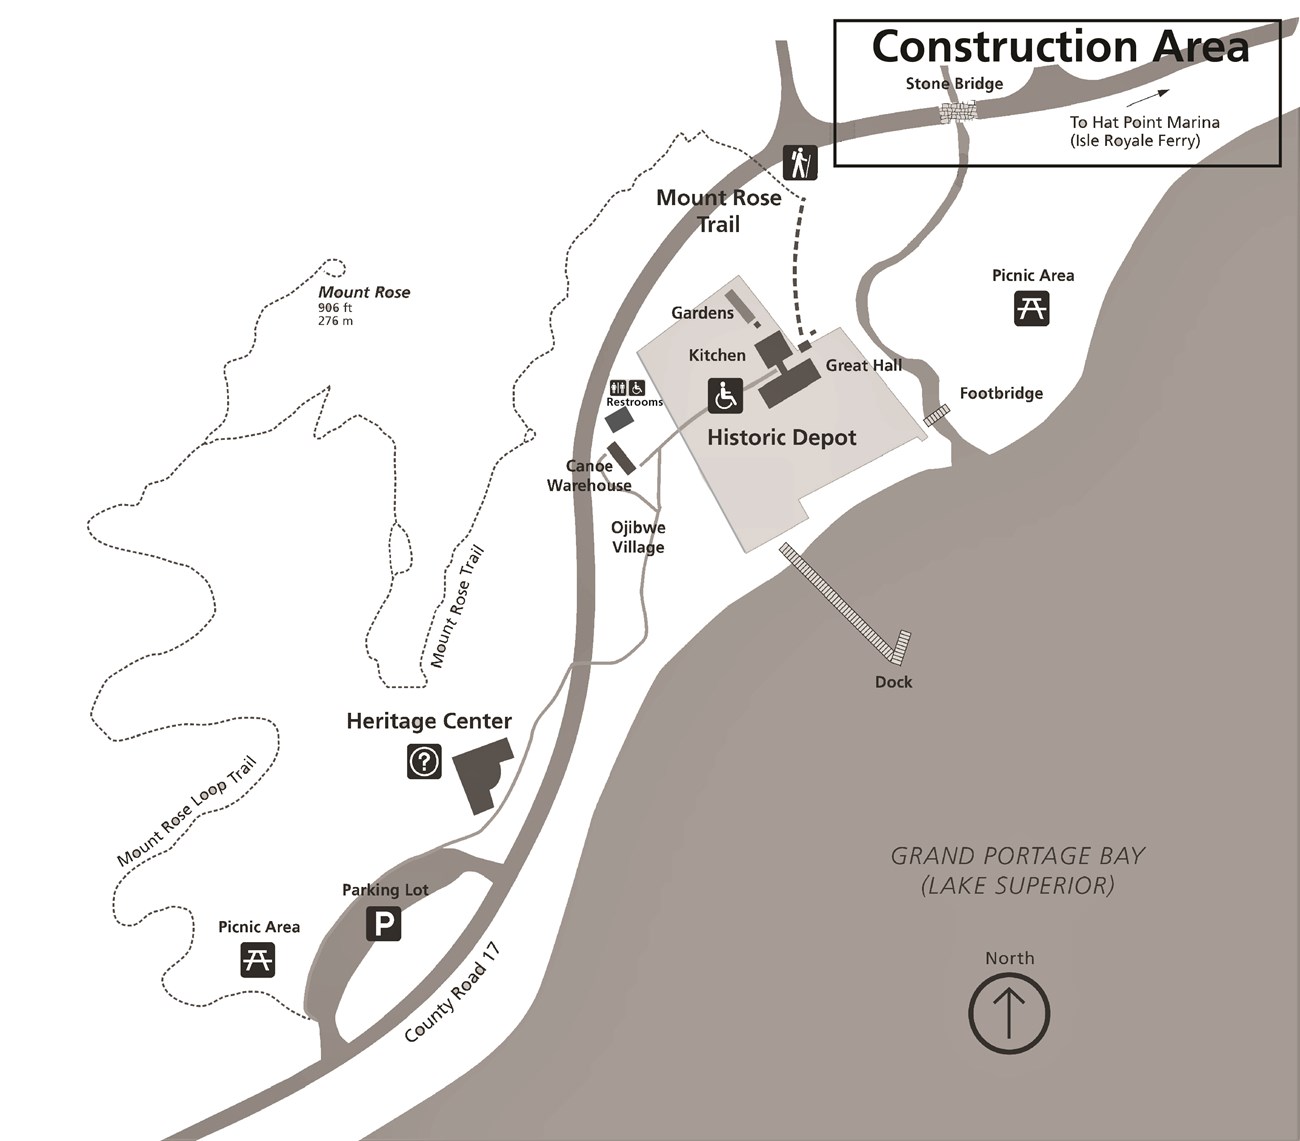 Map of the Mount Rose Trail area during construction. Detailed alternative text below.